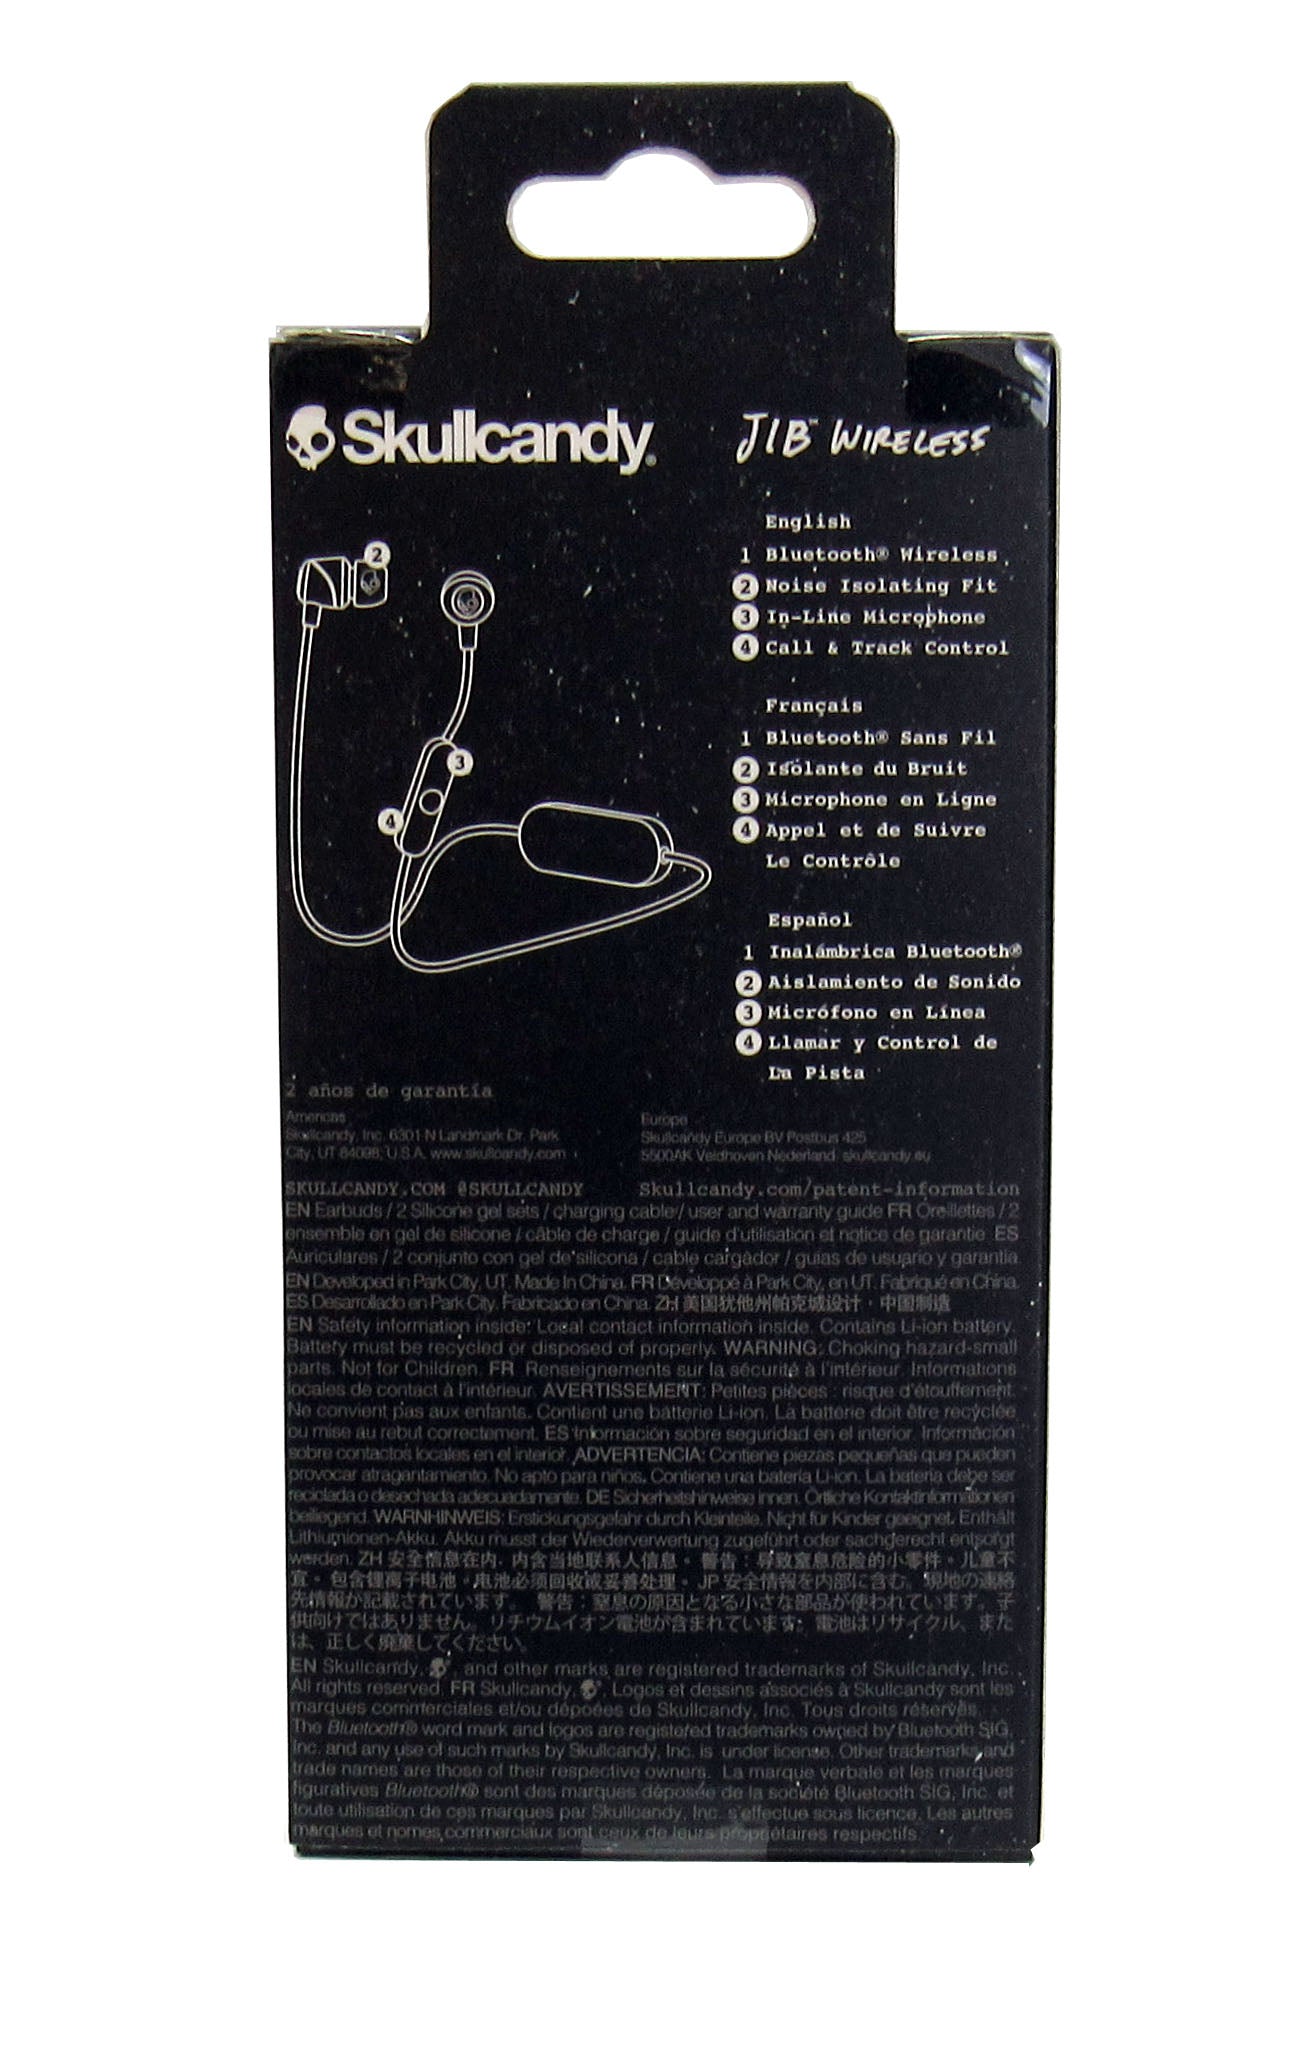 Skullcandy SCS2DUW-K003 Jib Bluetooth Wireless In-Ear Earbuds Earphones with Microphone for Hands-Free Calls, 6-Hour Rechargeable Battery, Included Ear Gels for Noise Isolation, Black/Street